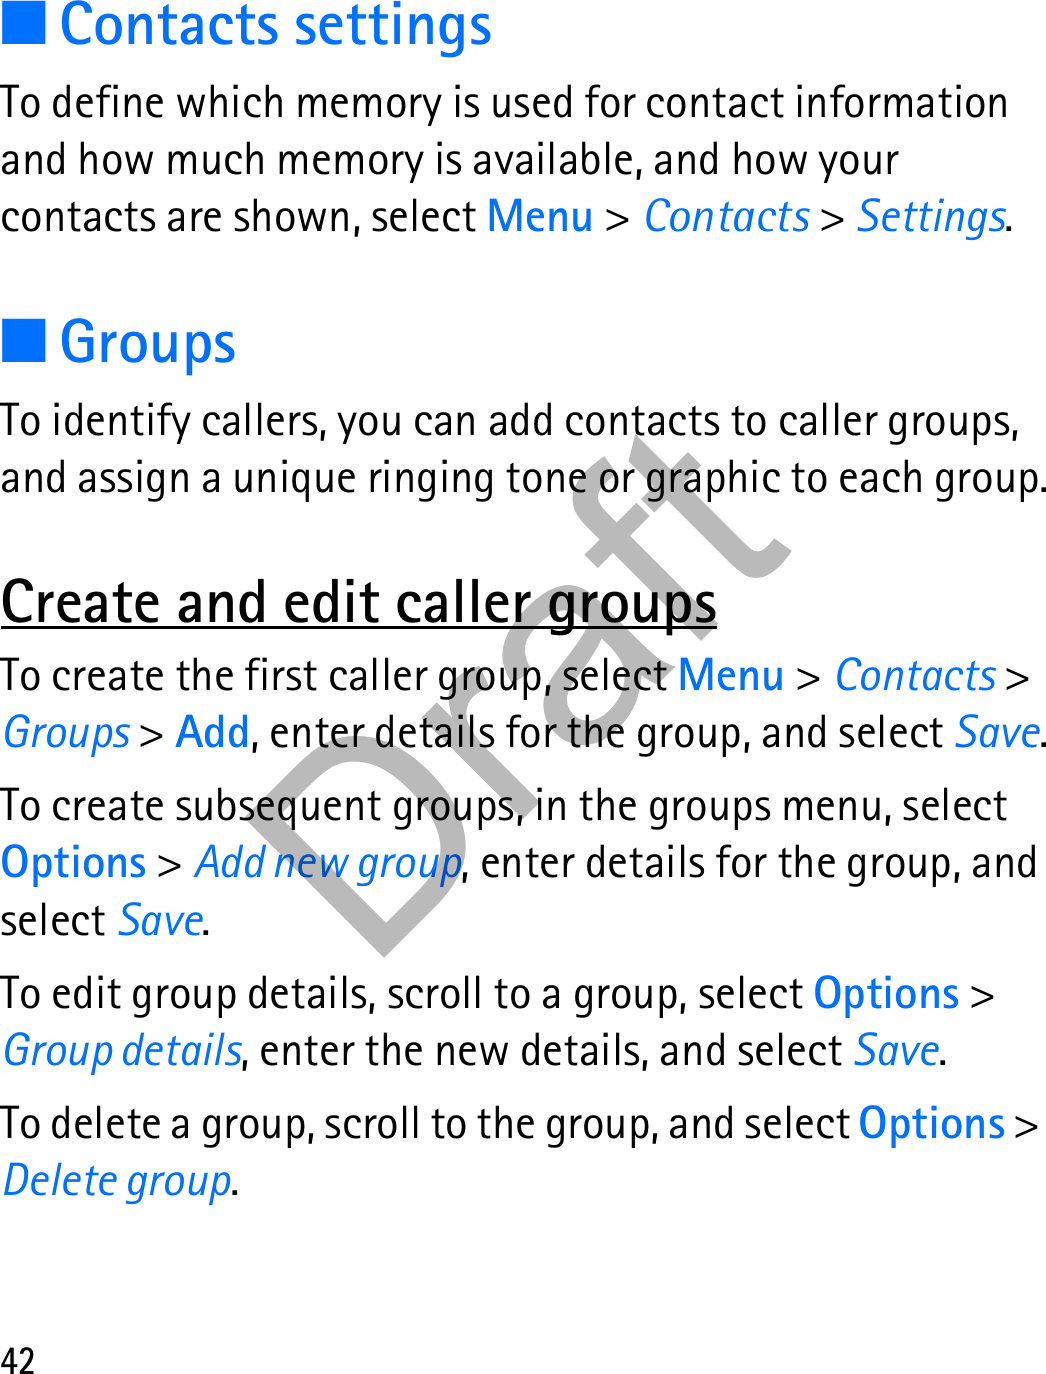 42■Contacts settingsTo define which memory is used for contact information and how much memory is available, and how your contacts are shown, select Menu &gt; Contacts &gt; Settings.■GroupsTo identify callers, you can add contacts to caller groups, and assign a unique ringing tone or graphic to each group.Create and edit caller groupsTo create the first caller group, select Menu &gt; Contacts &gt; Groups &gt; Add, enter details for the group, and select Save.To create subsequent groups, in the groups menu, select Options &gt; Add new group, enter details for the group, and select Save.To edit group details, scroll to a group, select Options &gt; Group details, enter the new details, and select Save.To delete a group, scroll to the group, and select Options &gt; Delete group.Draft